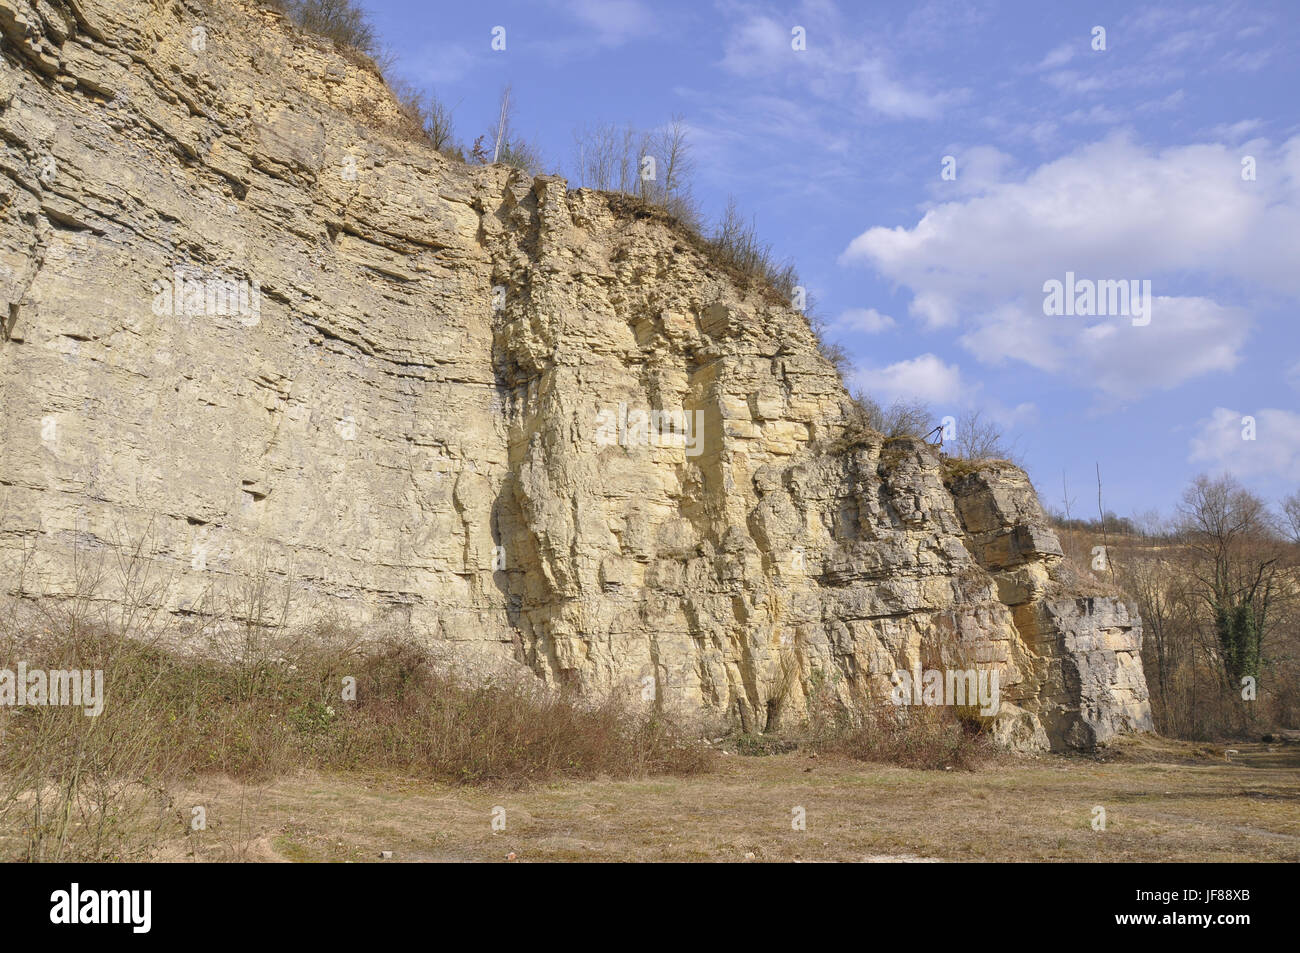 Stone Quarry in the Rems Valley, Germany Stock Photo